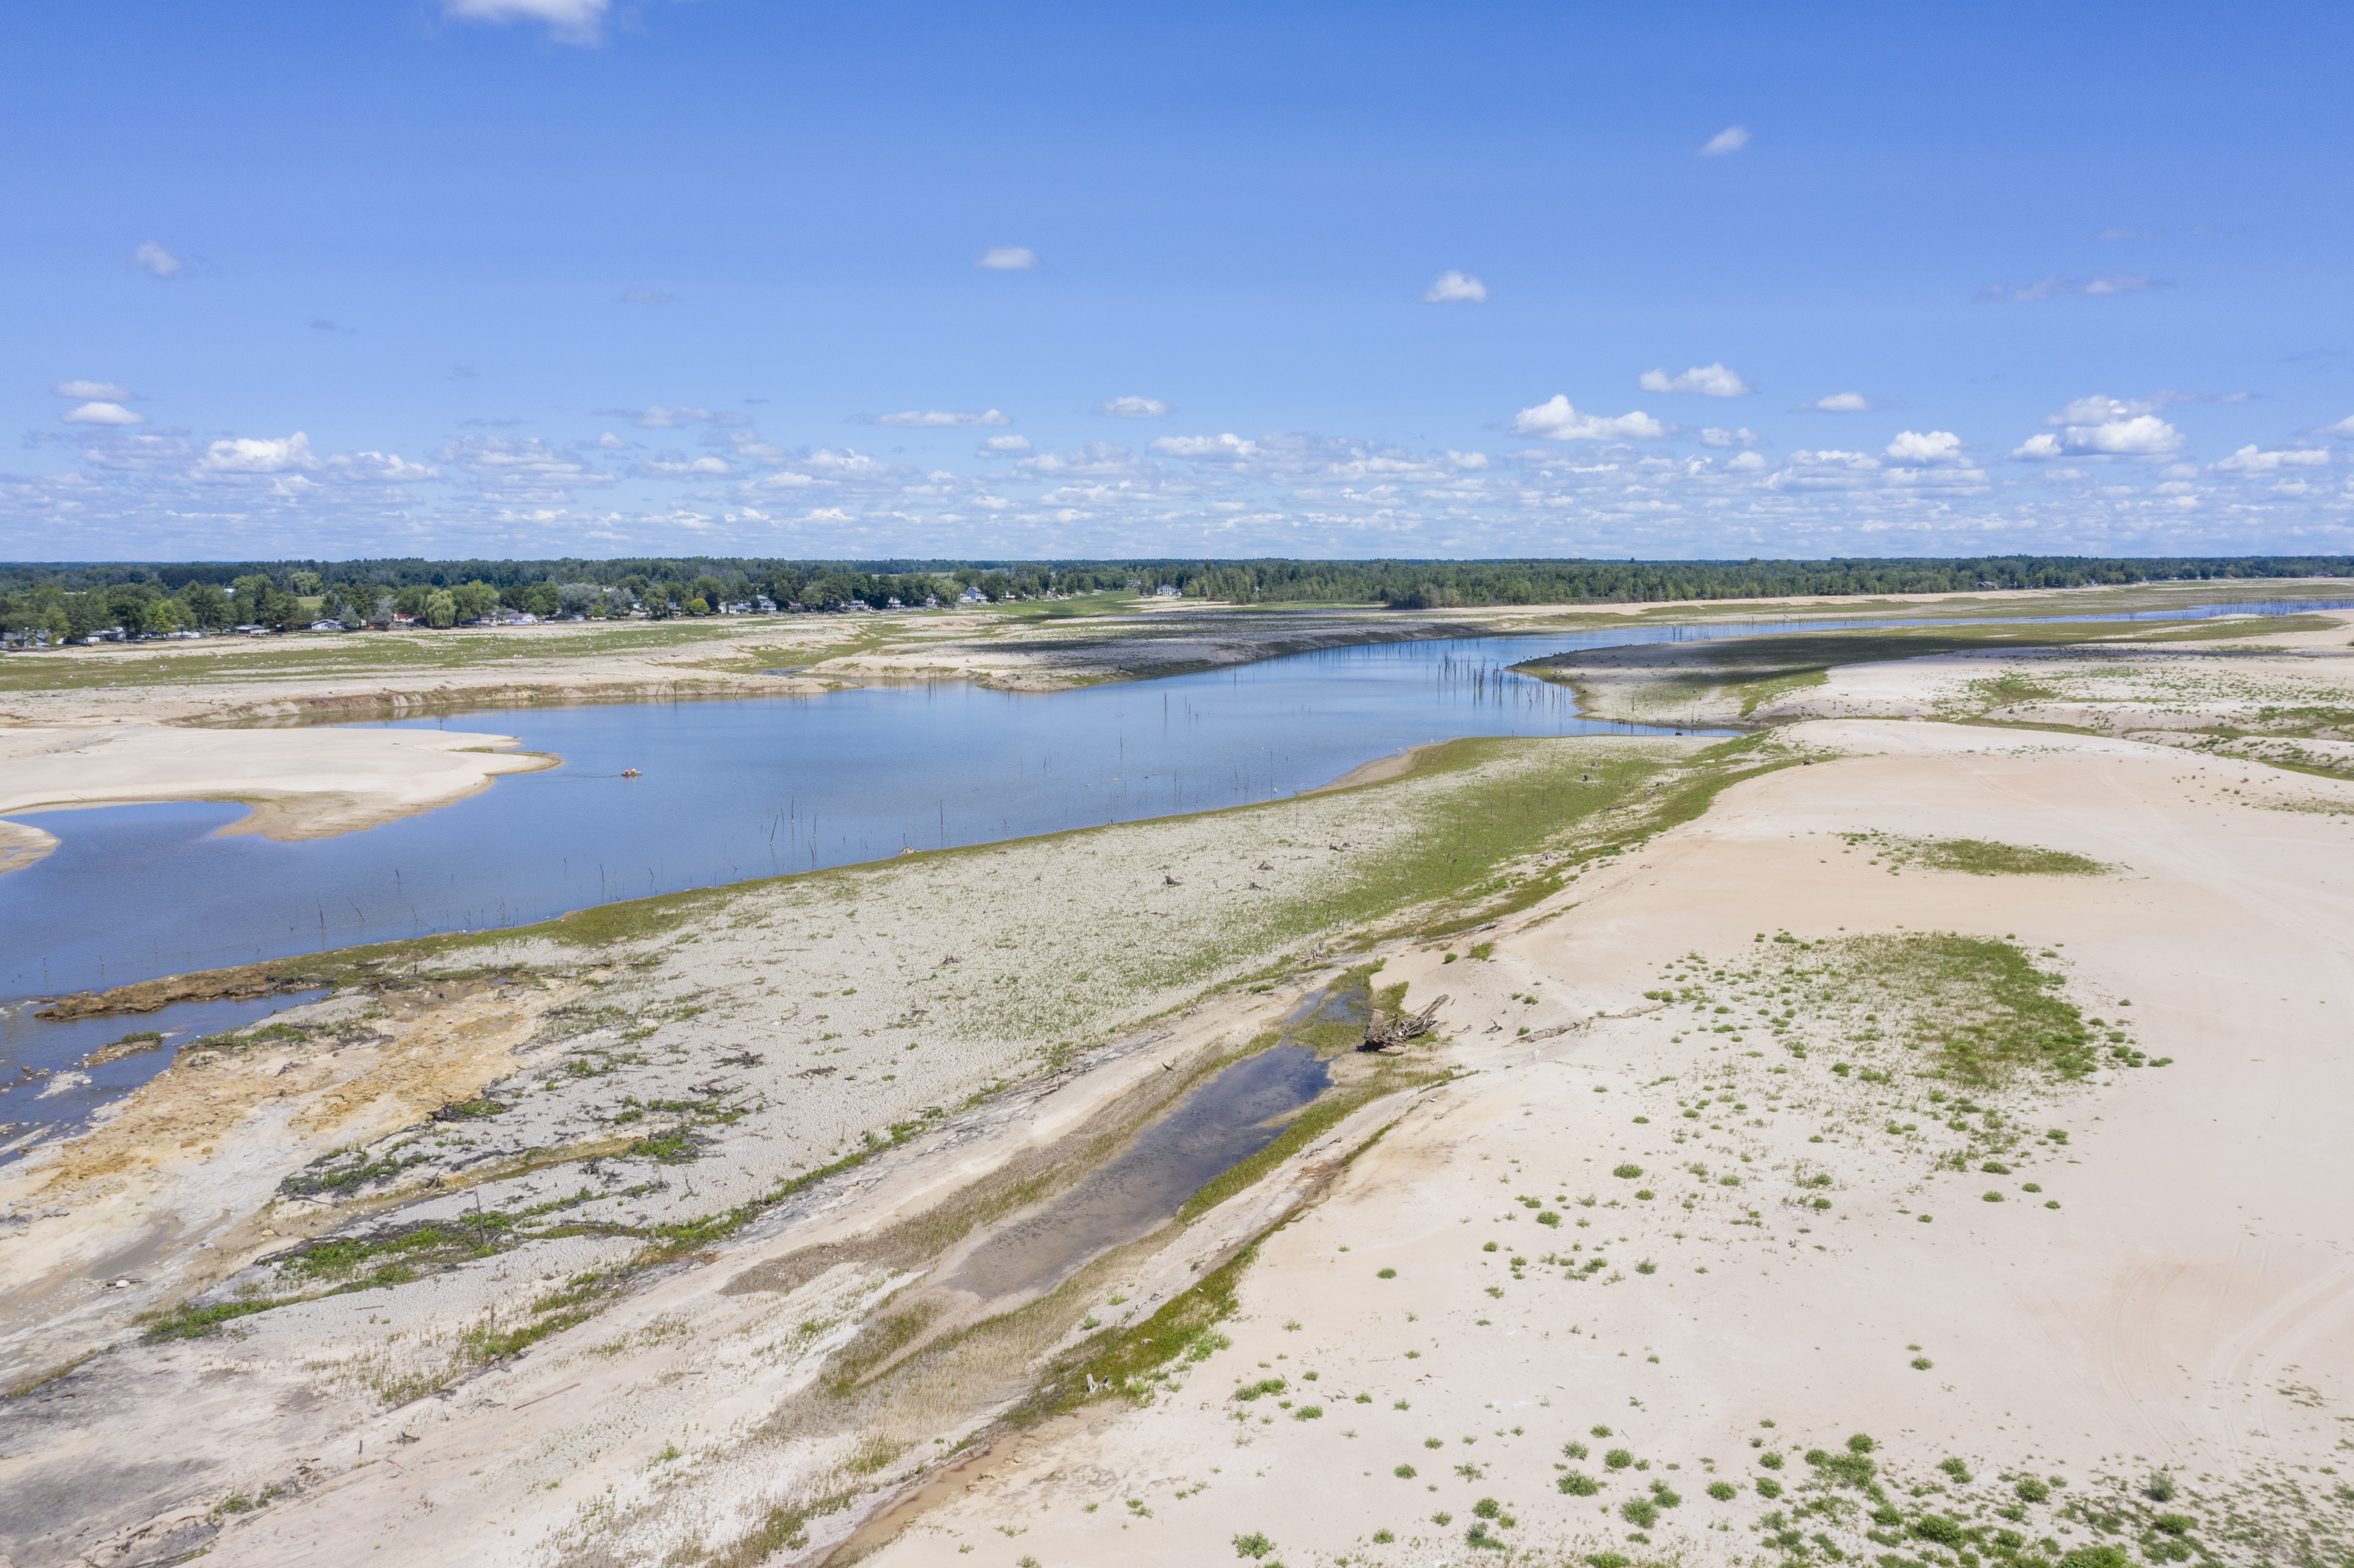 A view of what's left of Wixom Lake in Hope Township on Thursday, July 30, 2020. The devastating flood in May due to the failure of the Edenville and Sanford Dam left Wixom and Sanford Lake nearly empty. (Kaytie Boomer | MLive.com)